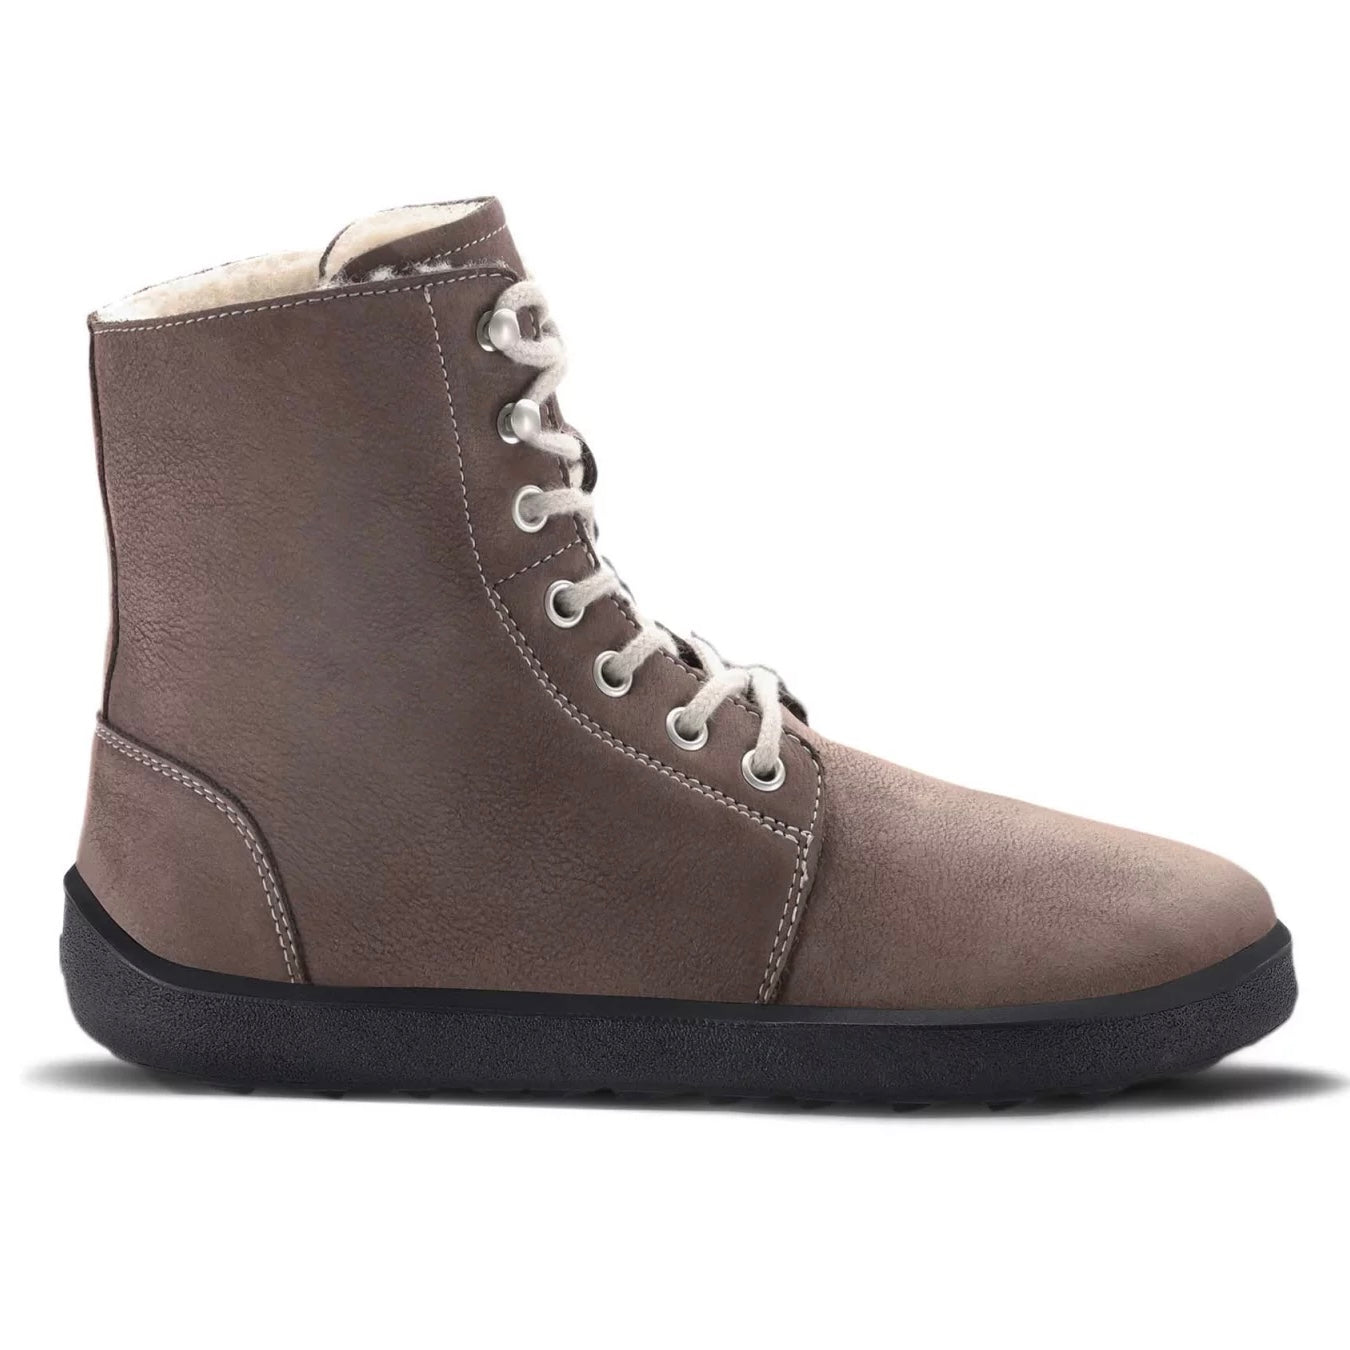 A photo of Be Lenka Winter Neo boots made with nubuck leather and rubber soles. The boots are chocolate brown in color and a lace up style with wool inside. One boot is shown facing to the right side against a white background. #color_chocolate-brown-nubuck